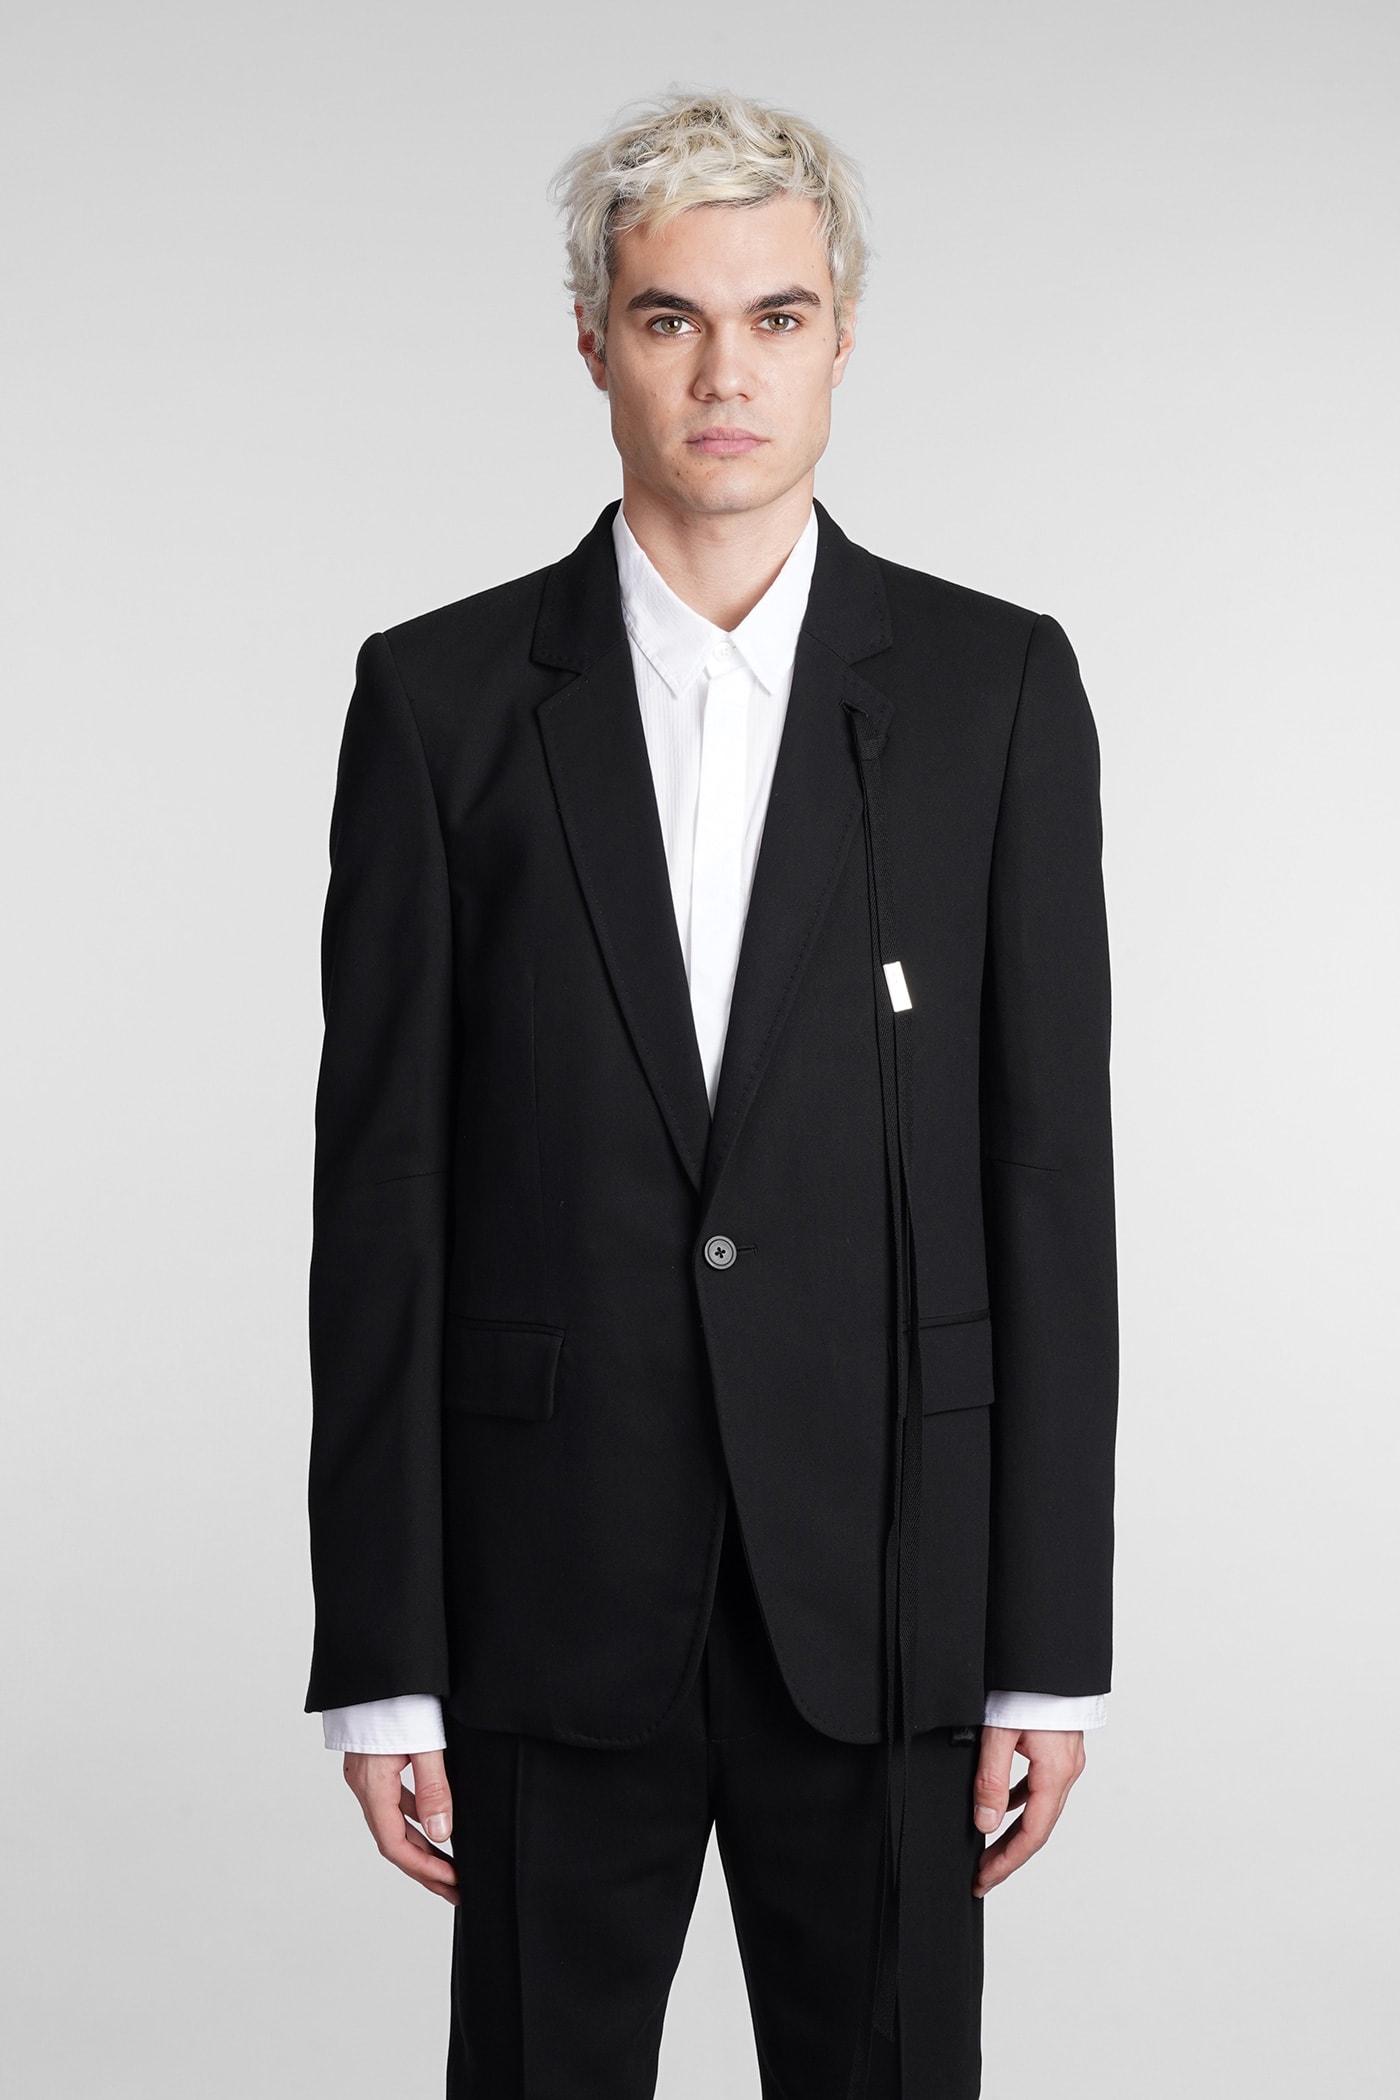 ANN DEMEULEMEESTER CLASSIC JACKET IN BLACK VISCOSE